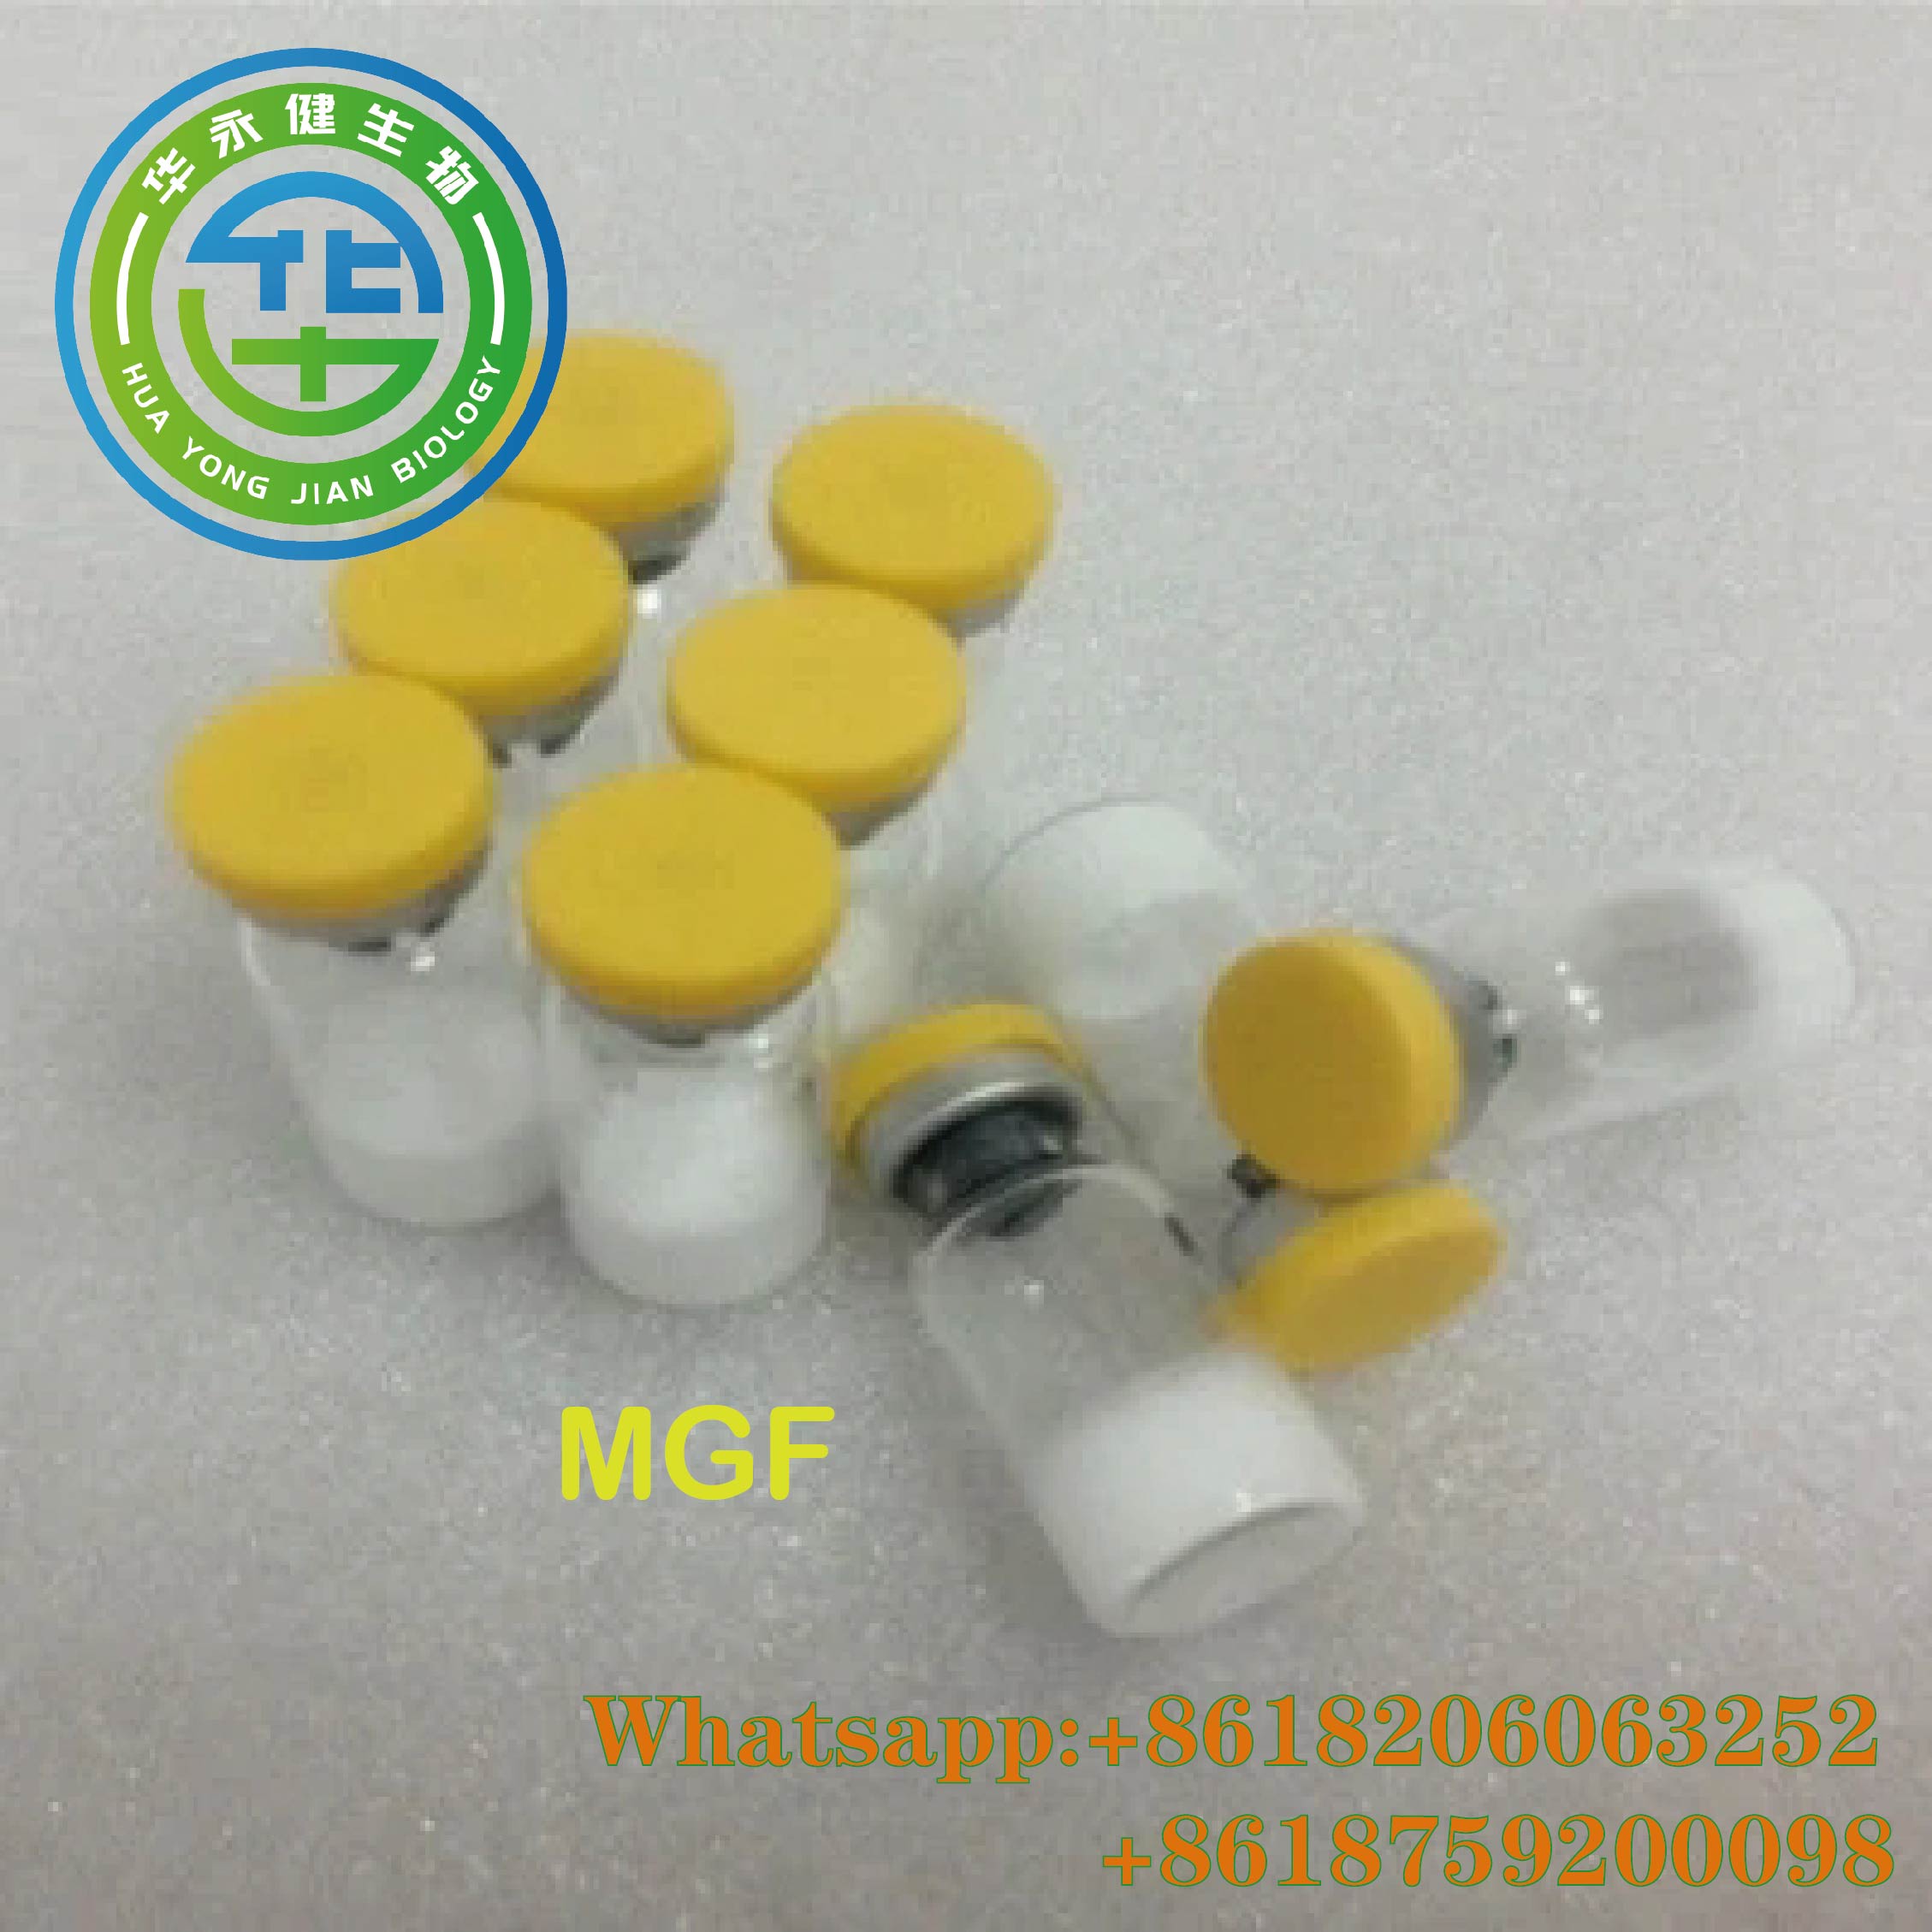 99% Pure Anabolic Injectable Steroid Hormones MGF 2mg/Vial For Bodybuilding Fitness 